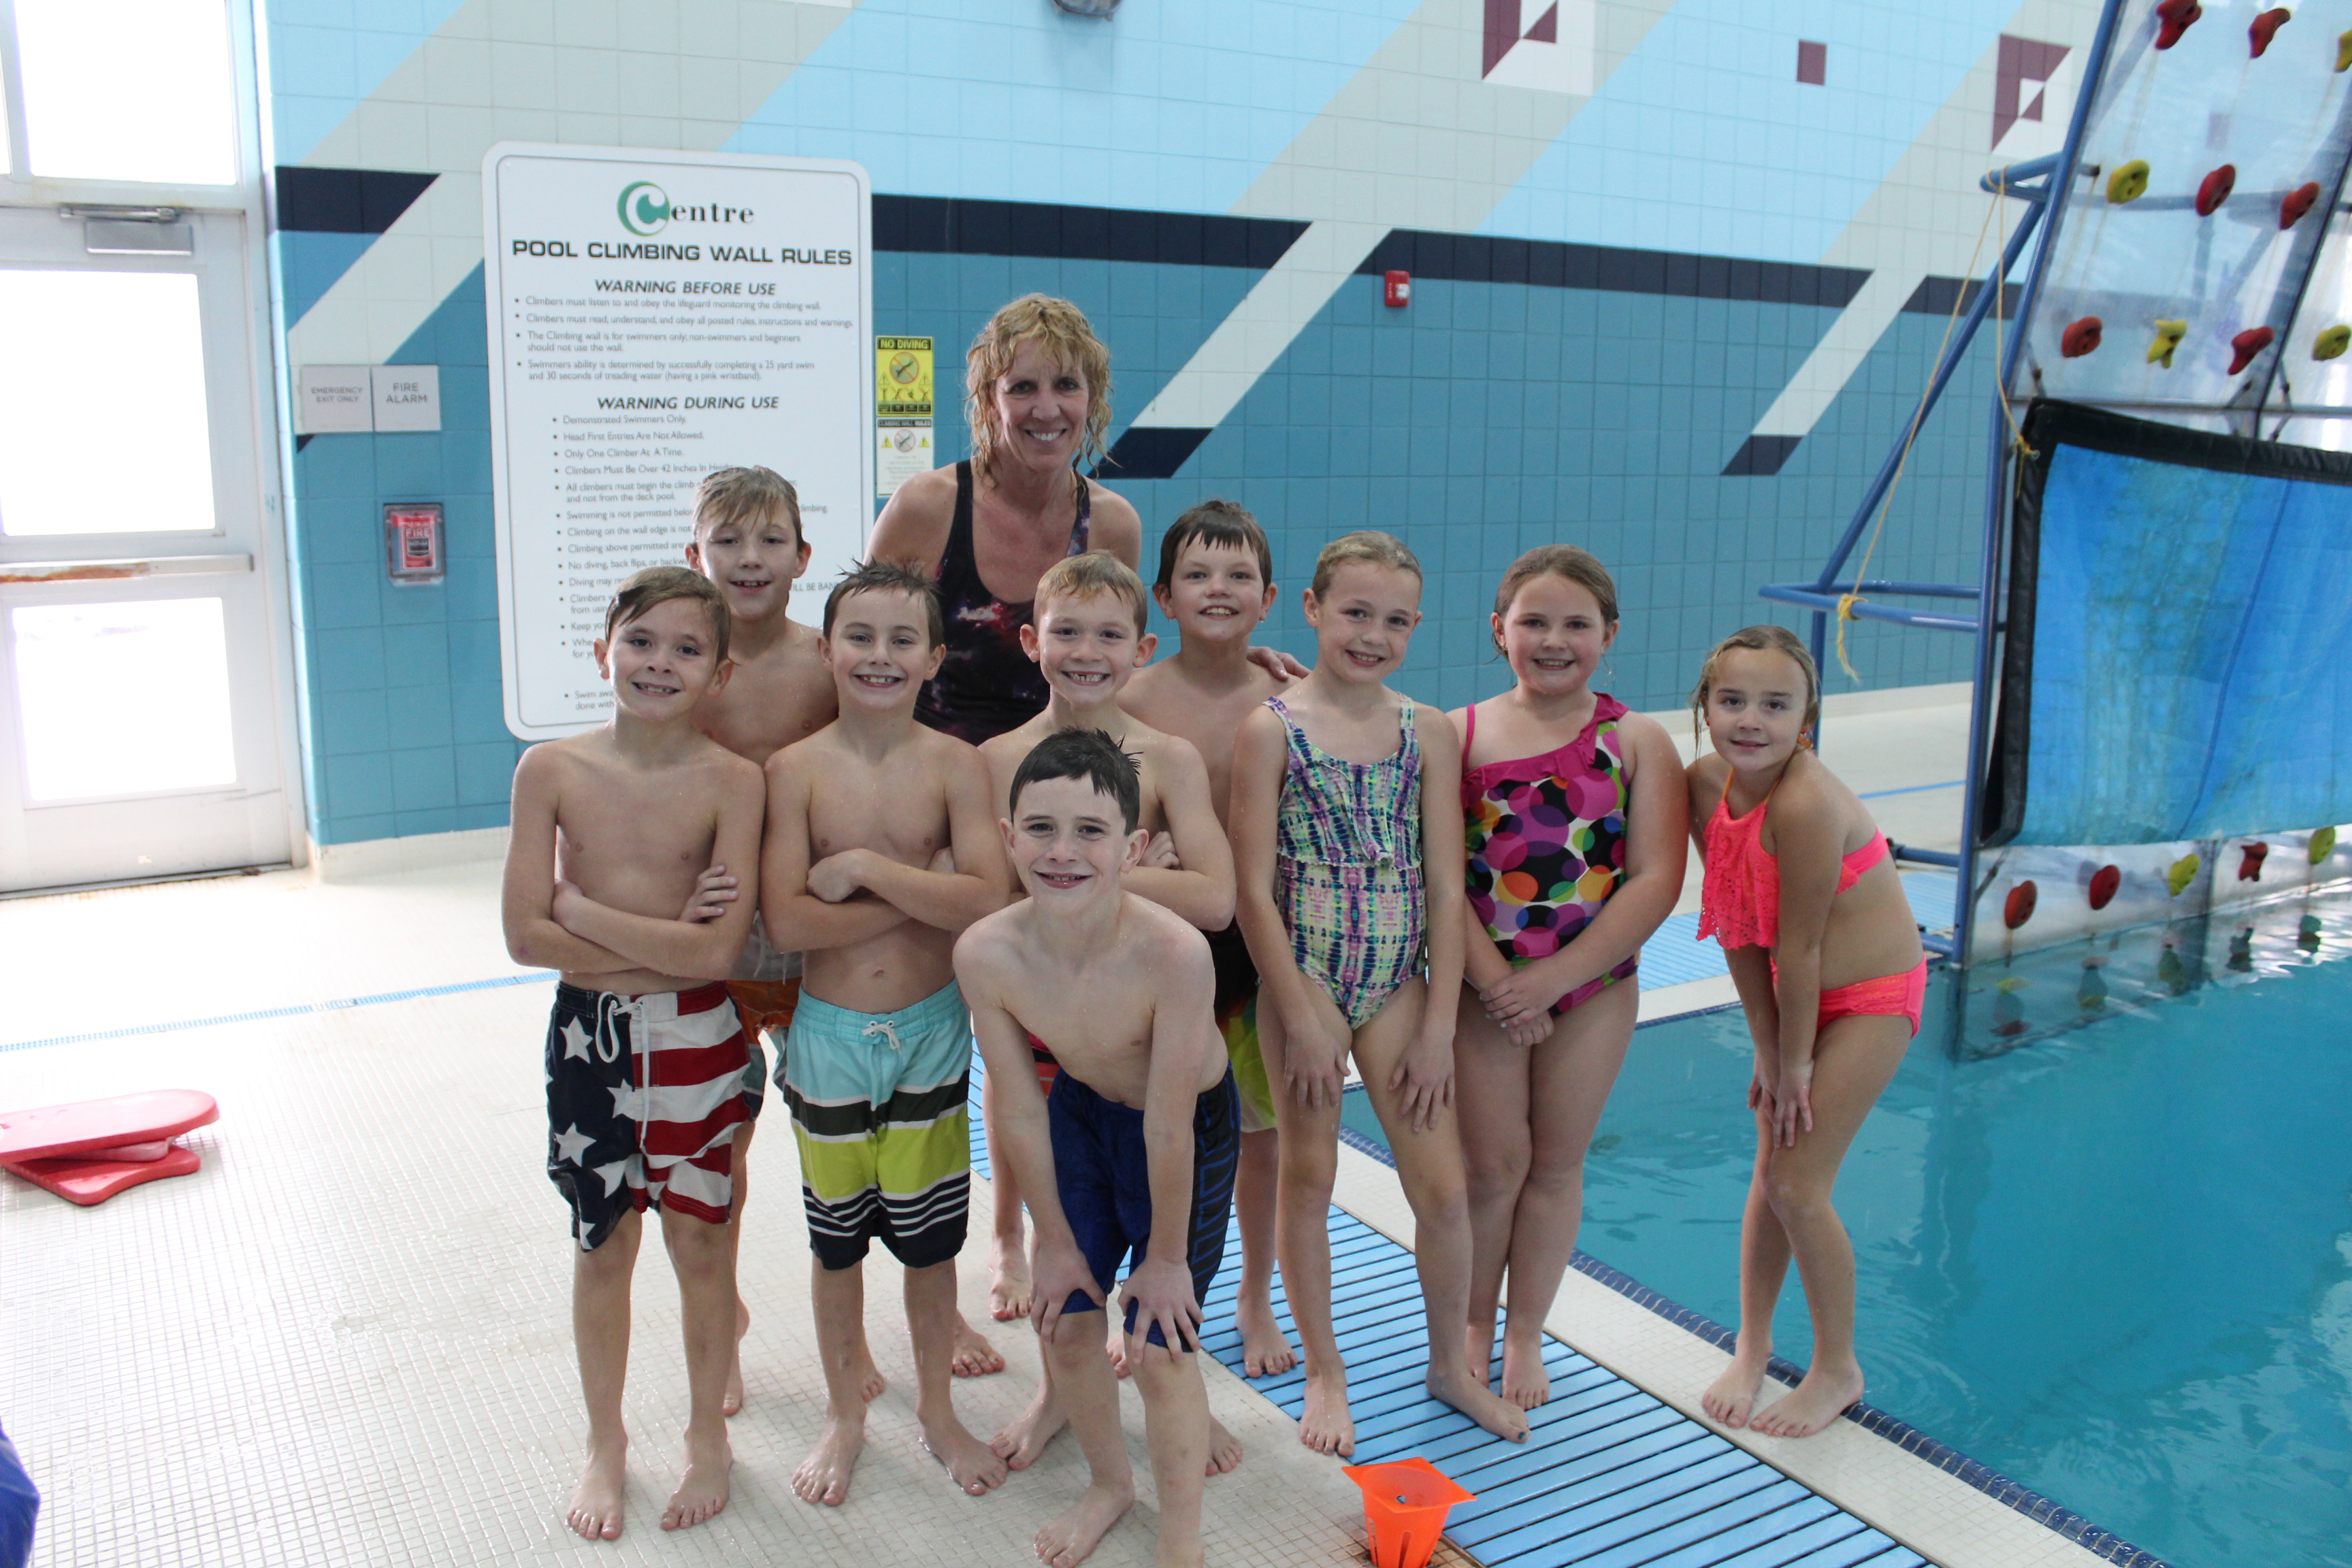 A group of kids and their instructor standing by the Centre pool